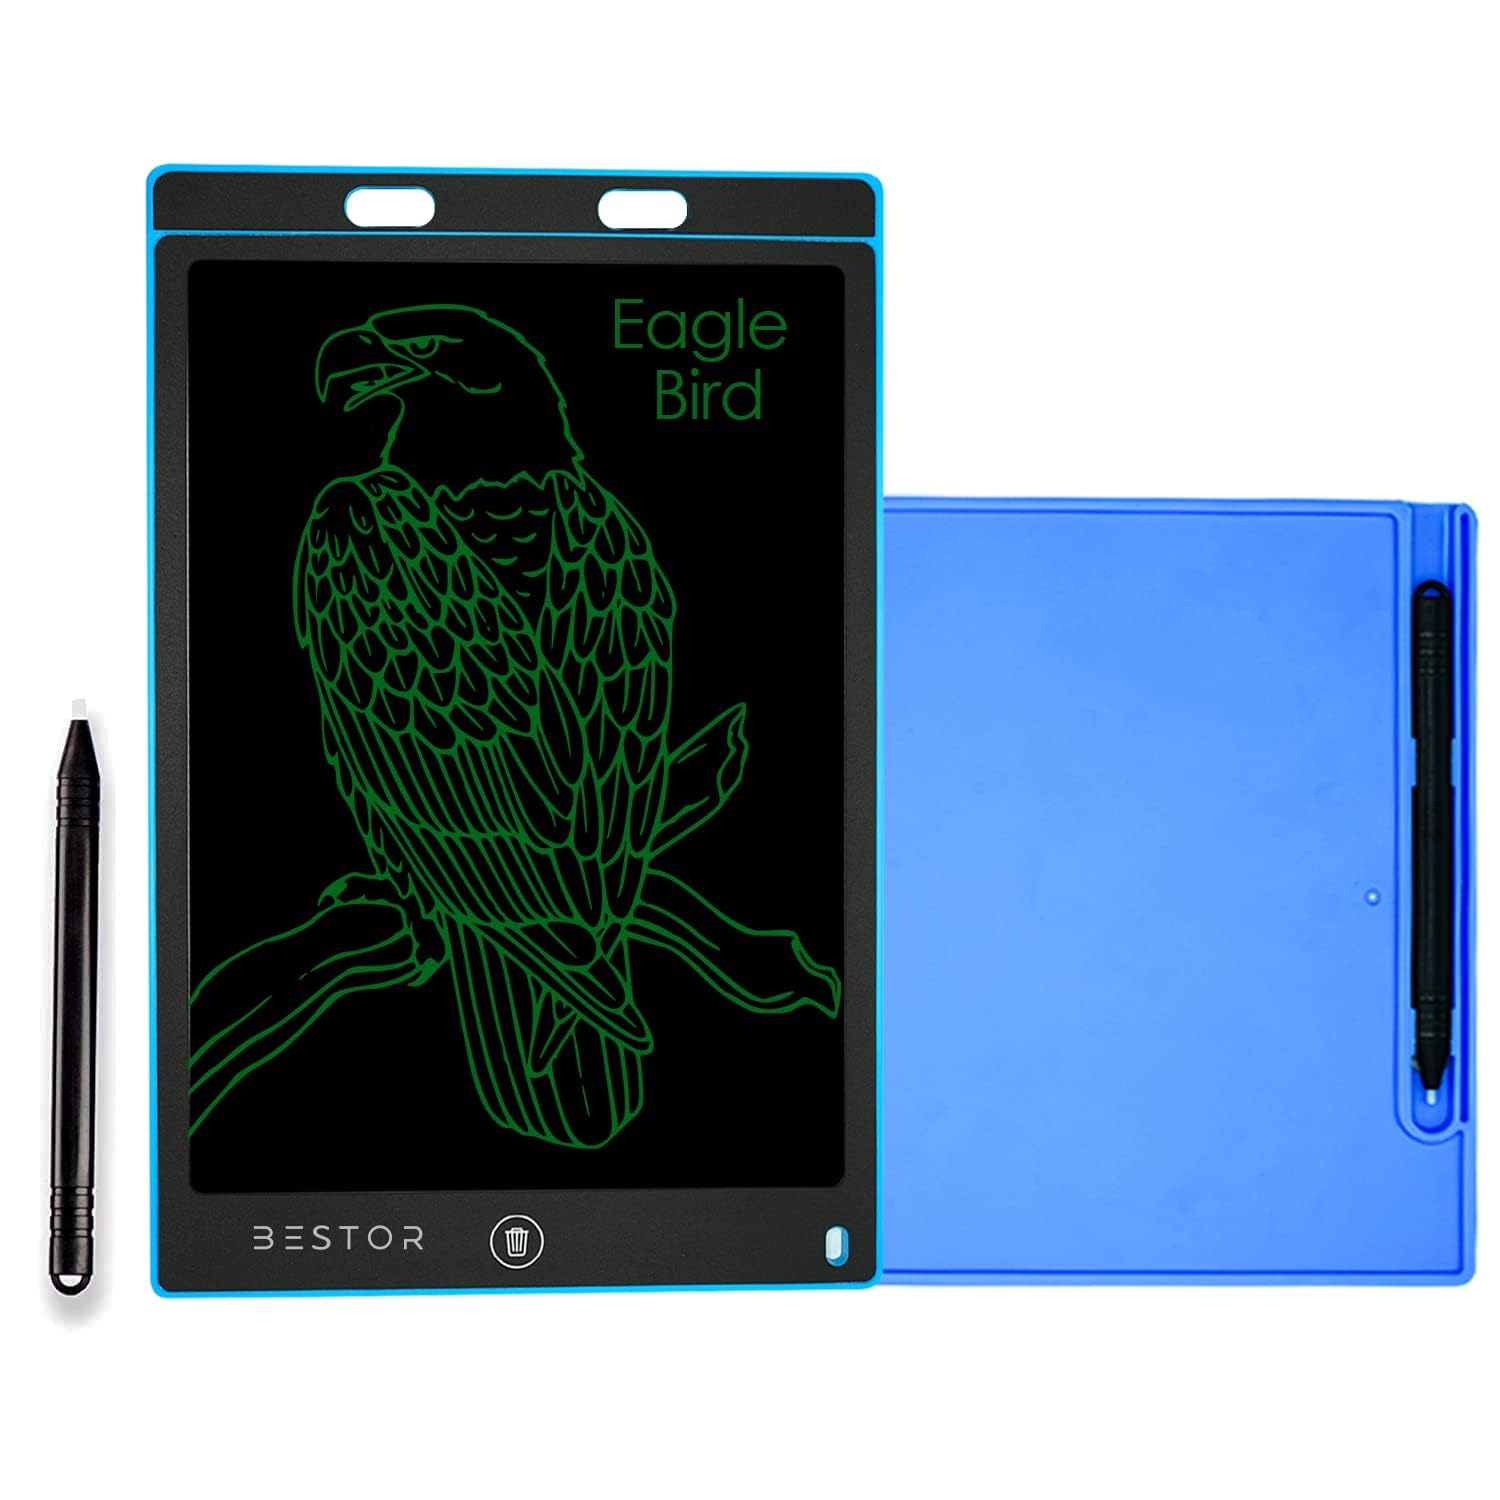 LCD Writing Tablet – The Home Trend